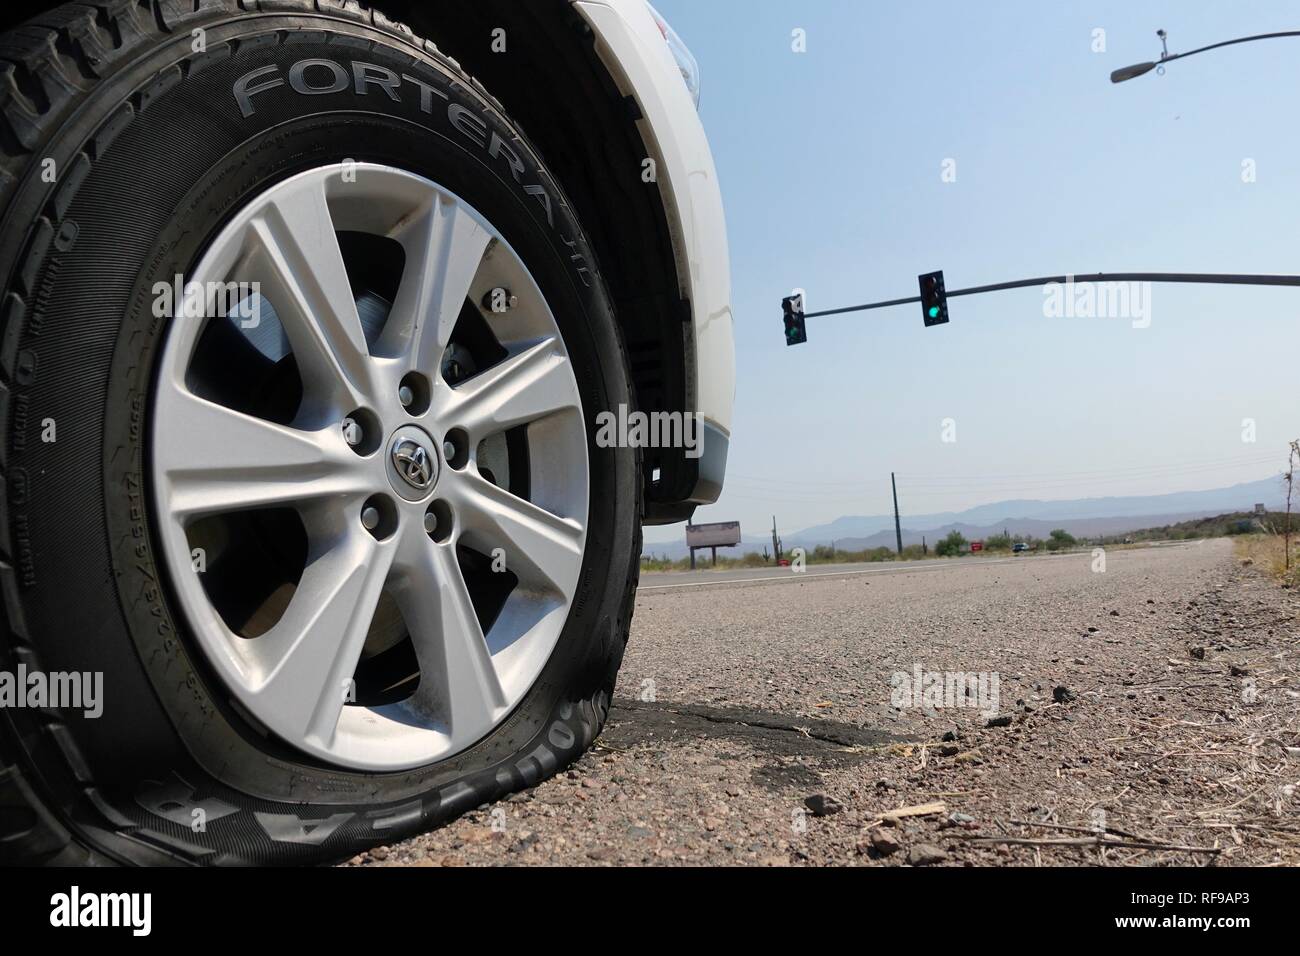 Chalk drawing, air escapes from flat tire, Berlin, Germany Stock Photo -  Alamy